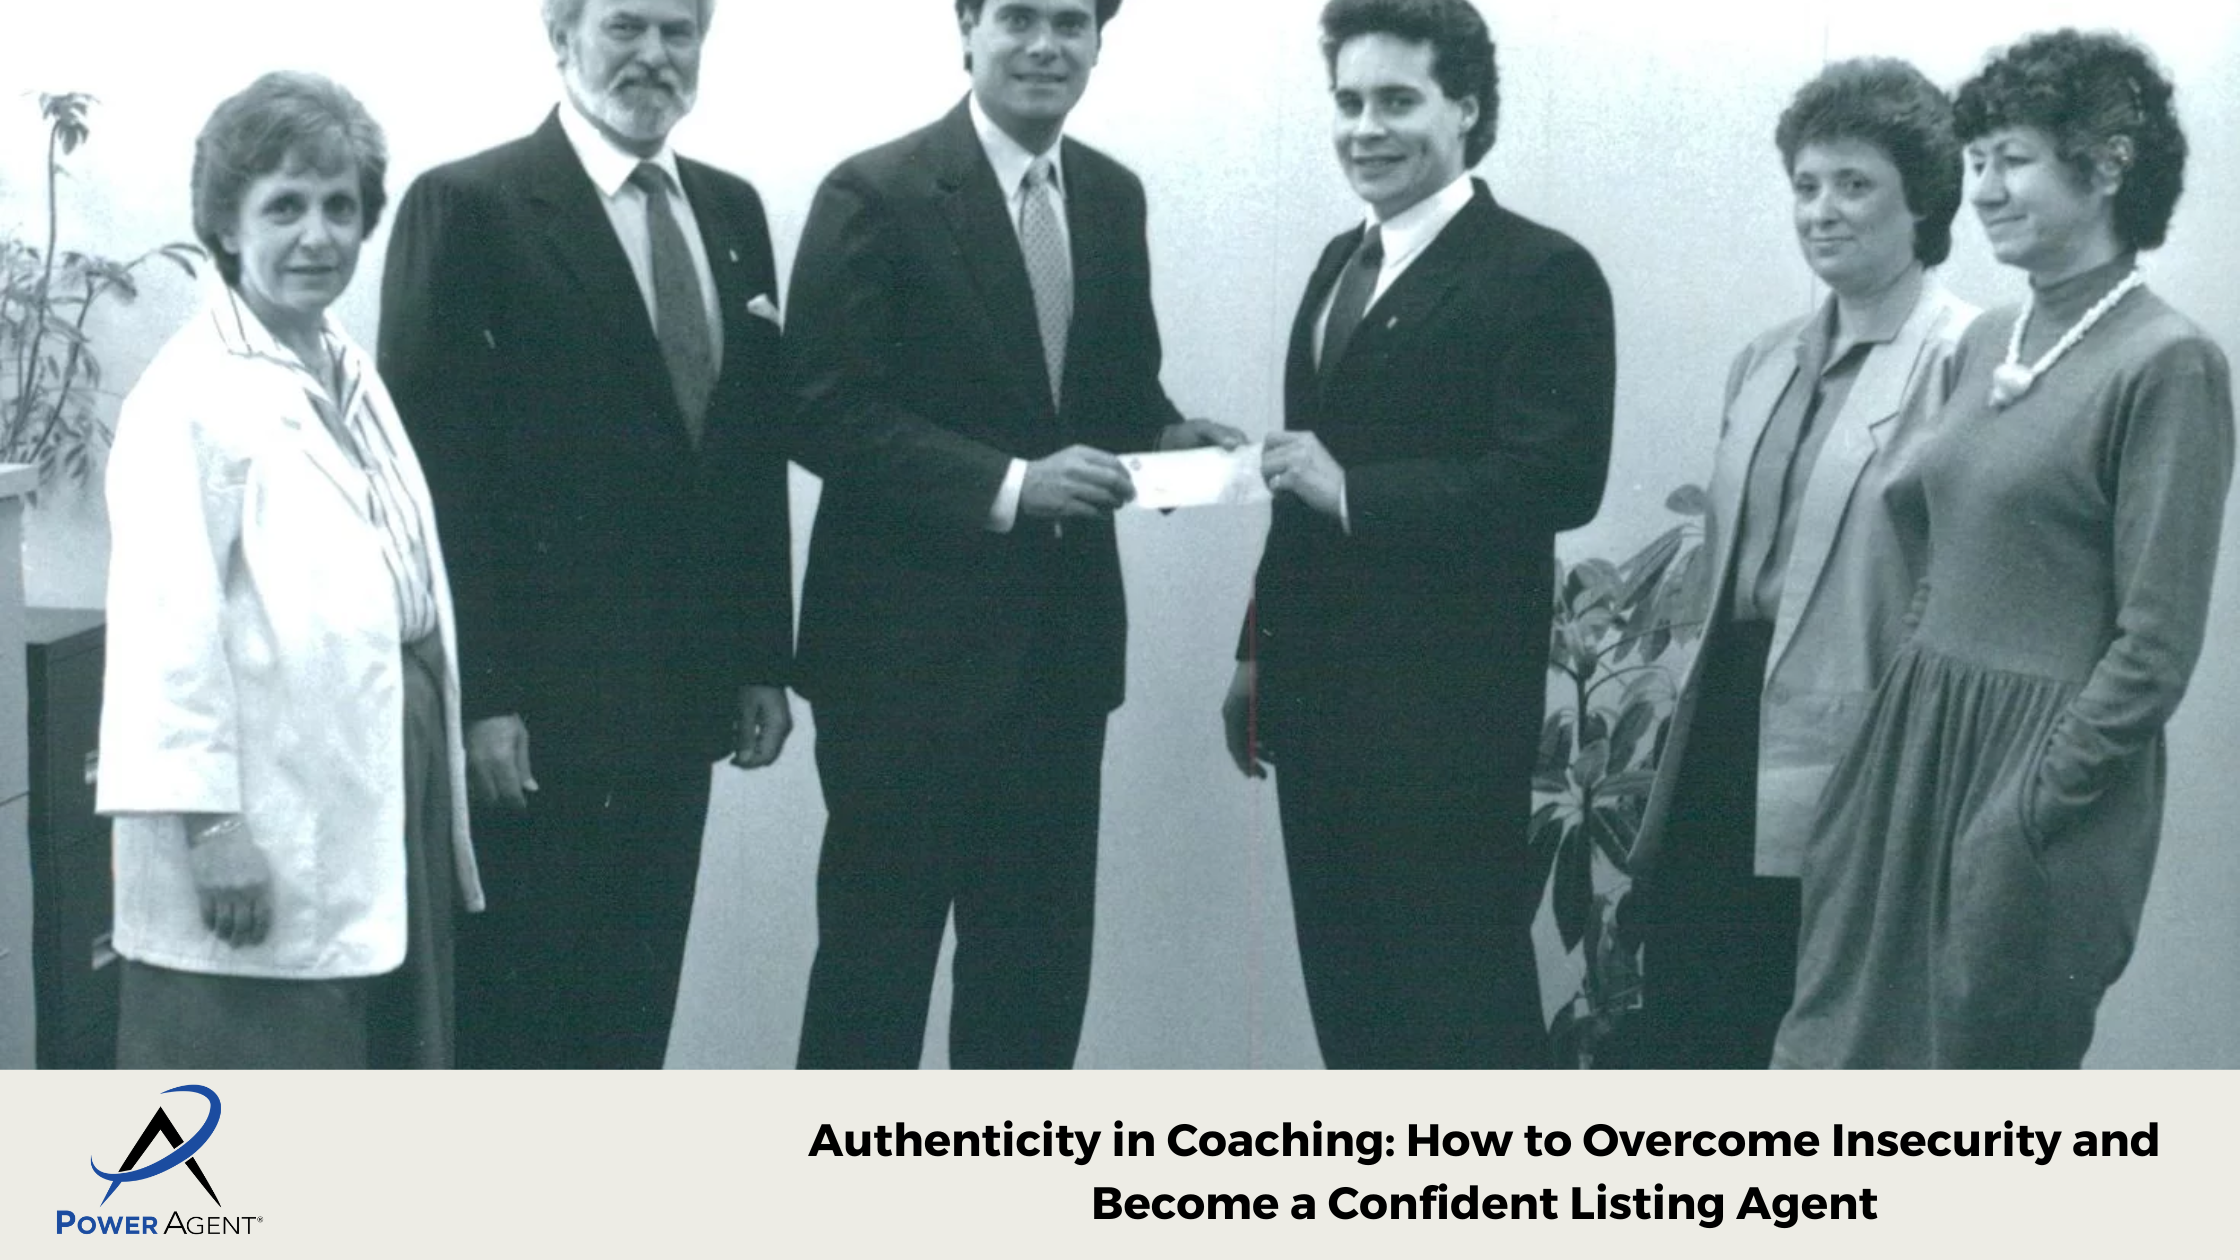 Authenticity in Coaching: How to Overcome Insecurity and Become a Confident Listing Agent